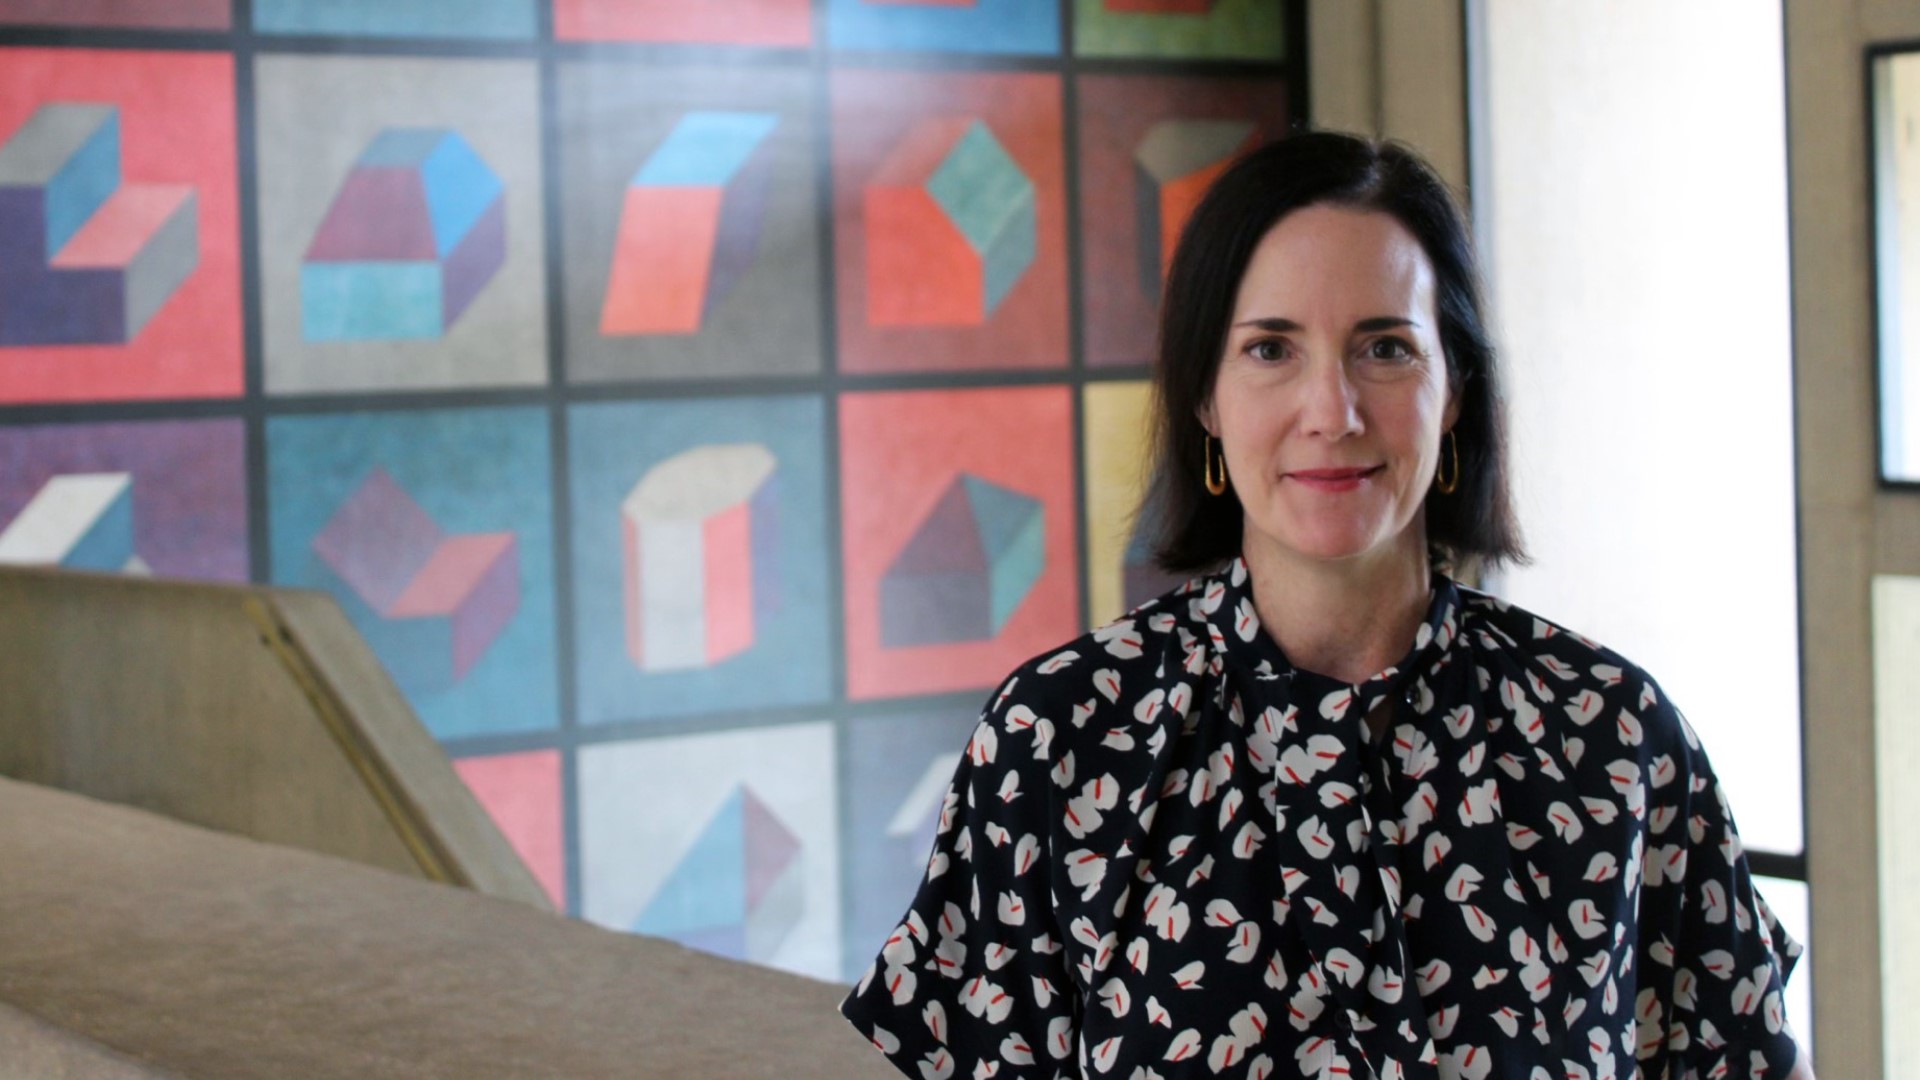 As the Des Moines Art Center celebrates its 75th anniversary, patrons might notice a new face: Dr. Kelly Baum, the new John and Mary Pappajohn Director.